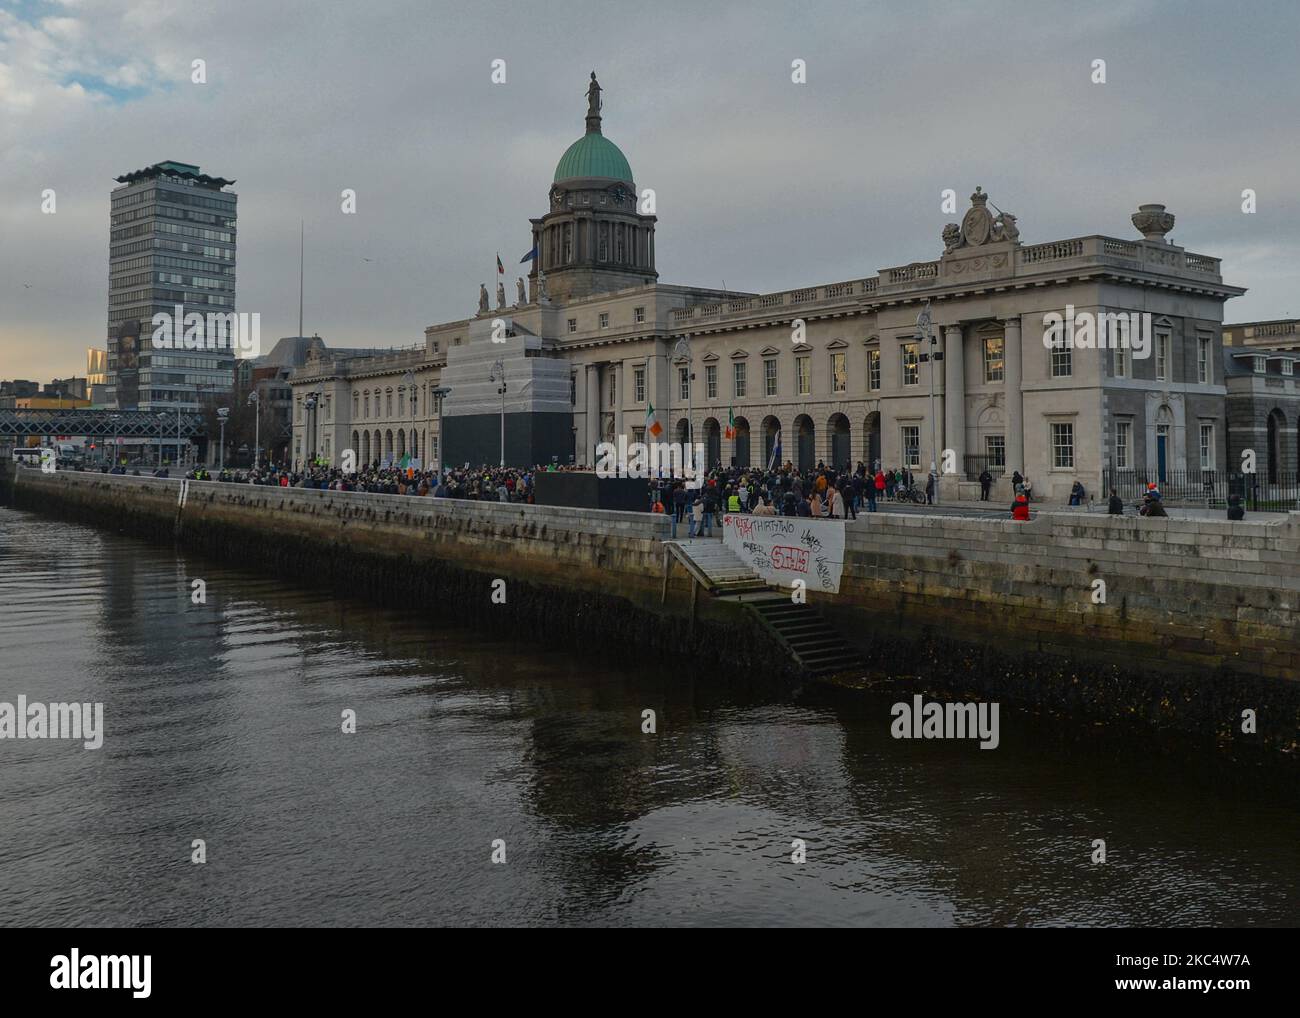 Members and supporters of the Irish Freedom Party during an anti-vaccination and anti-lockdown rally outside the Custom House, on day 39 of the nationwide Level 5 lockdown. On Saturday, November 28, 2020, in Dublin, Ireland. (Photo by Artur Widak/NurPhoto) Stock Photo